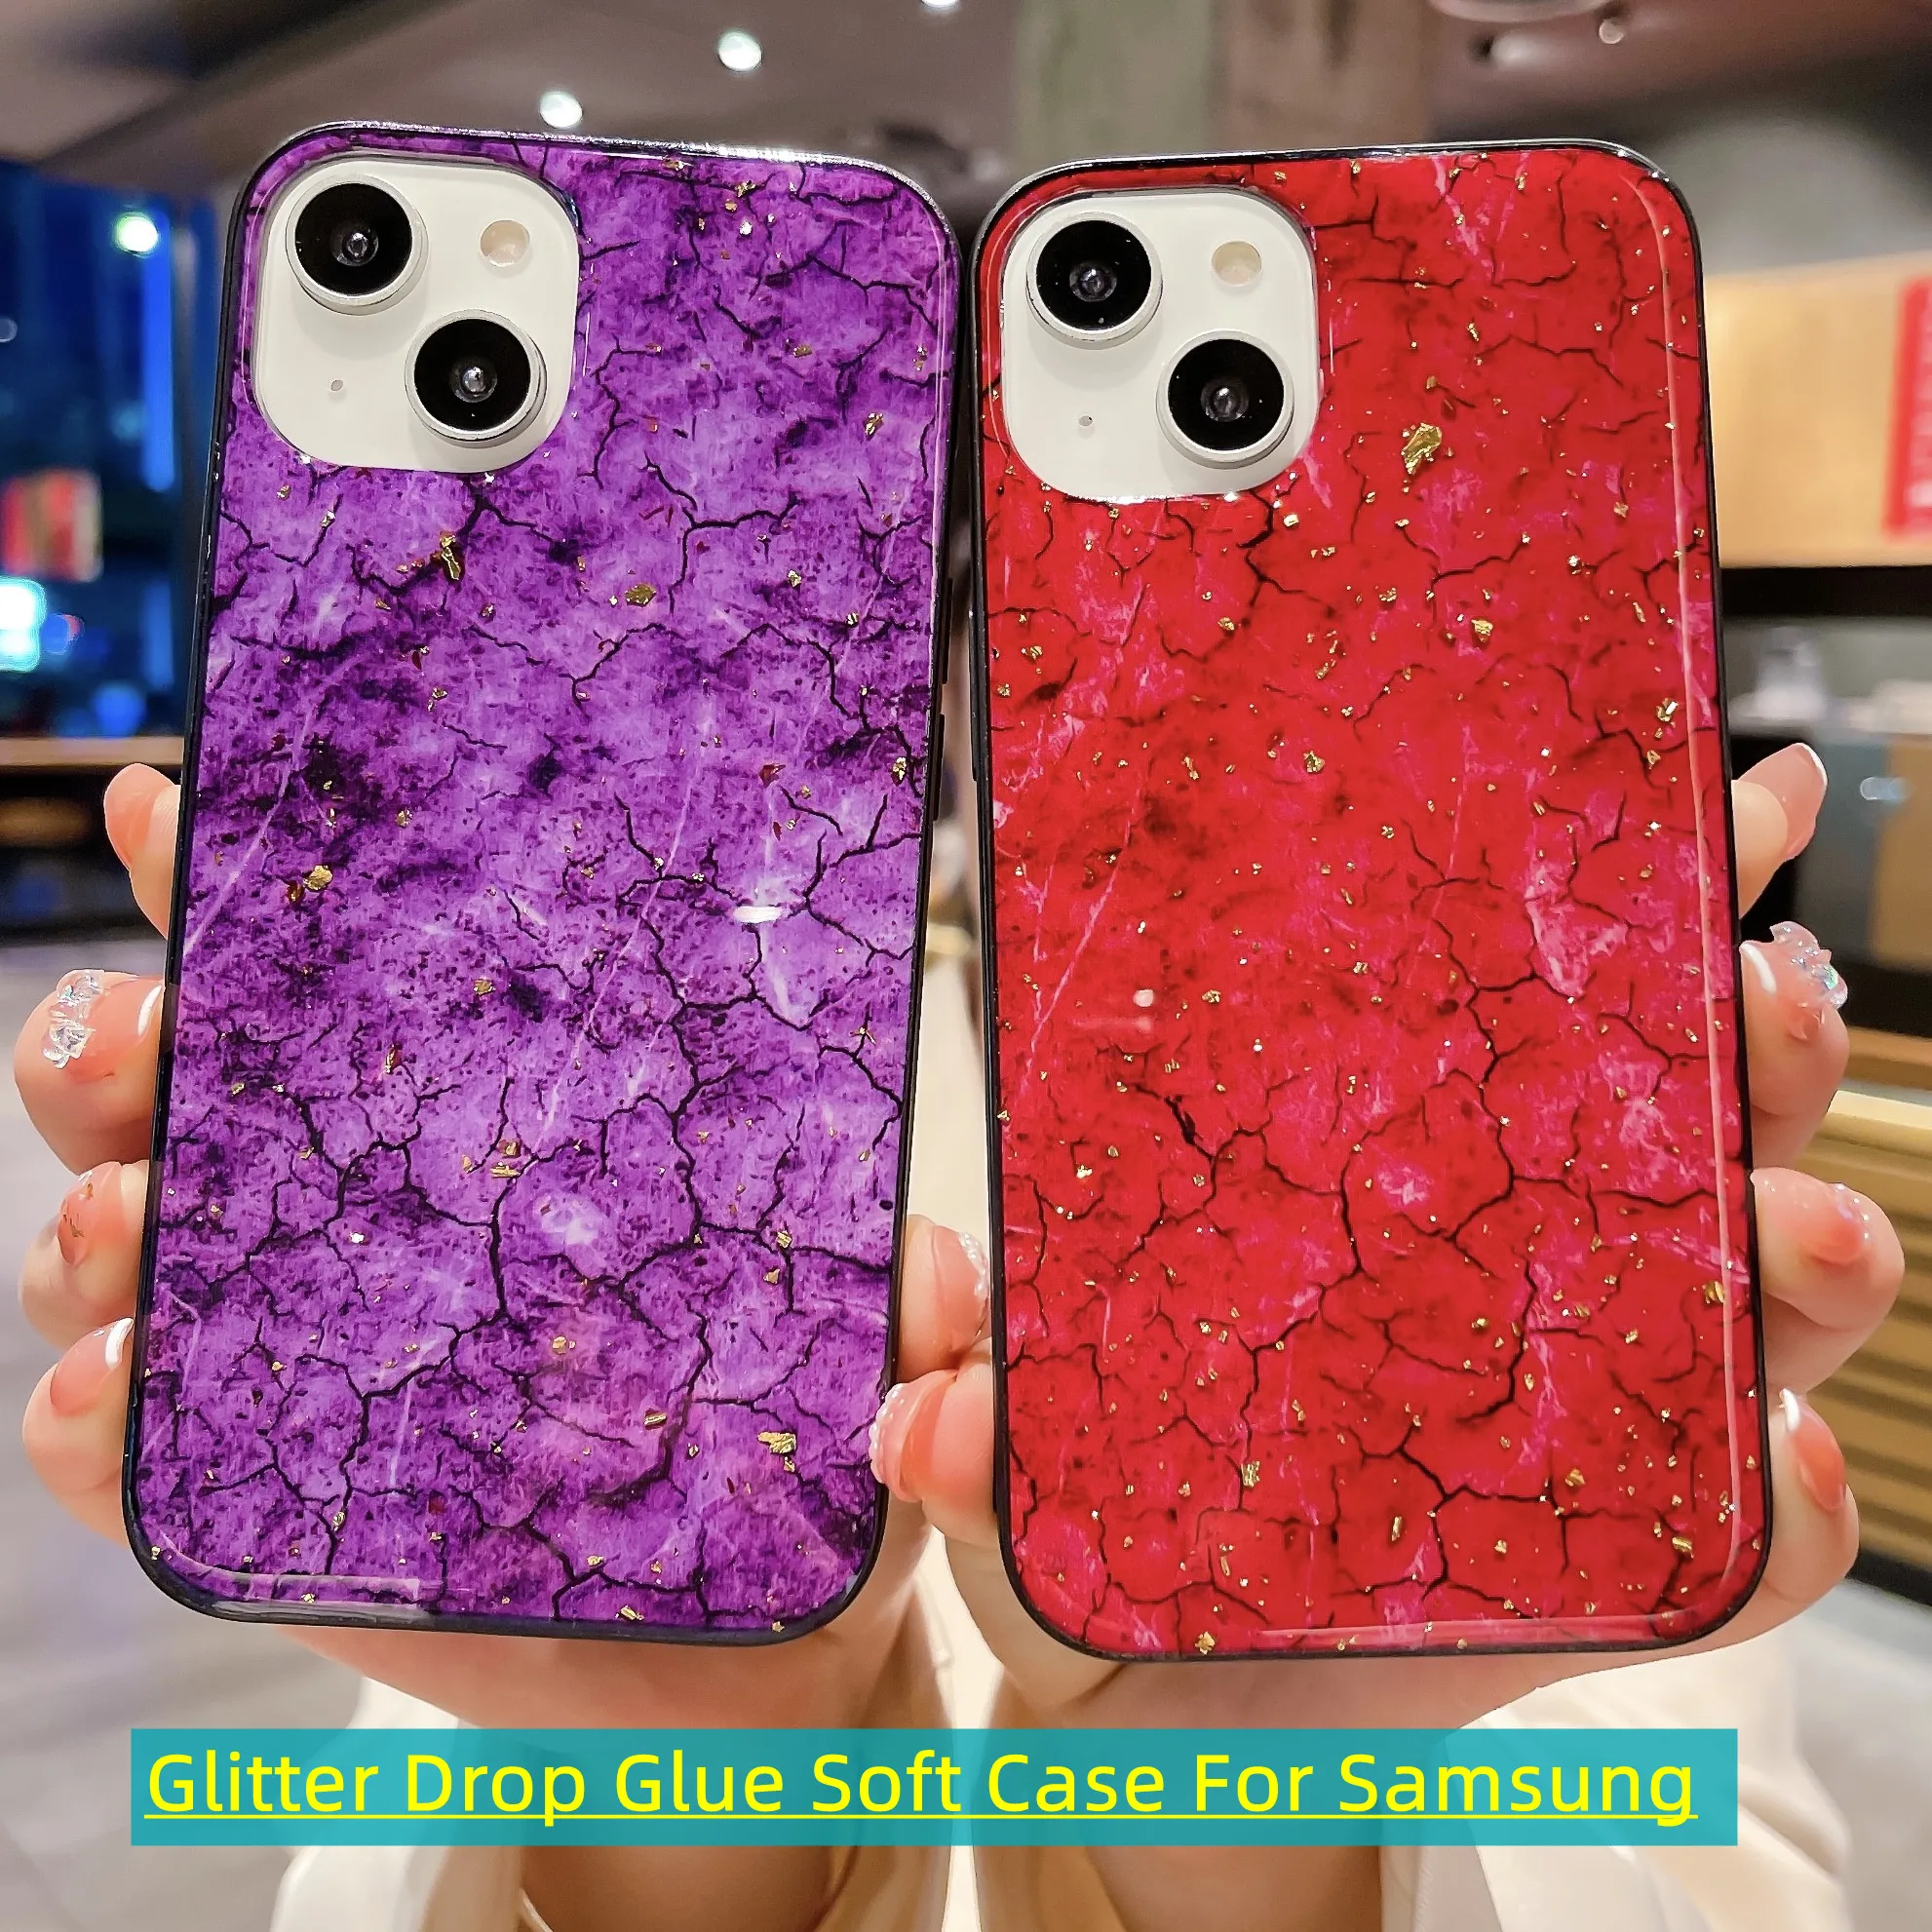 Epoxy Gold Foil Marble Case For Samsung A73 A53 A33 A23 A13 Glitter Drop Glue Soft Shell For A71 A51 A21 A12 A22 A32 A52 A70 A10